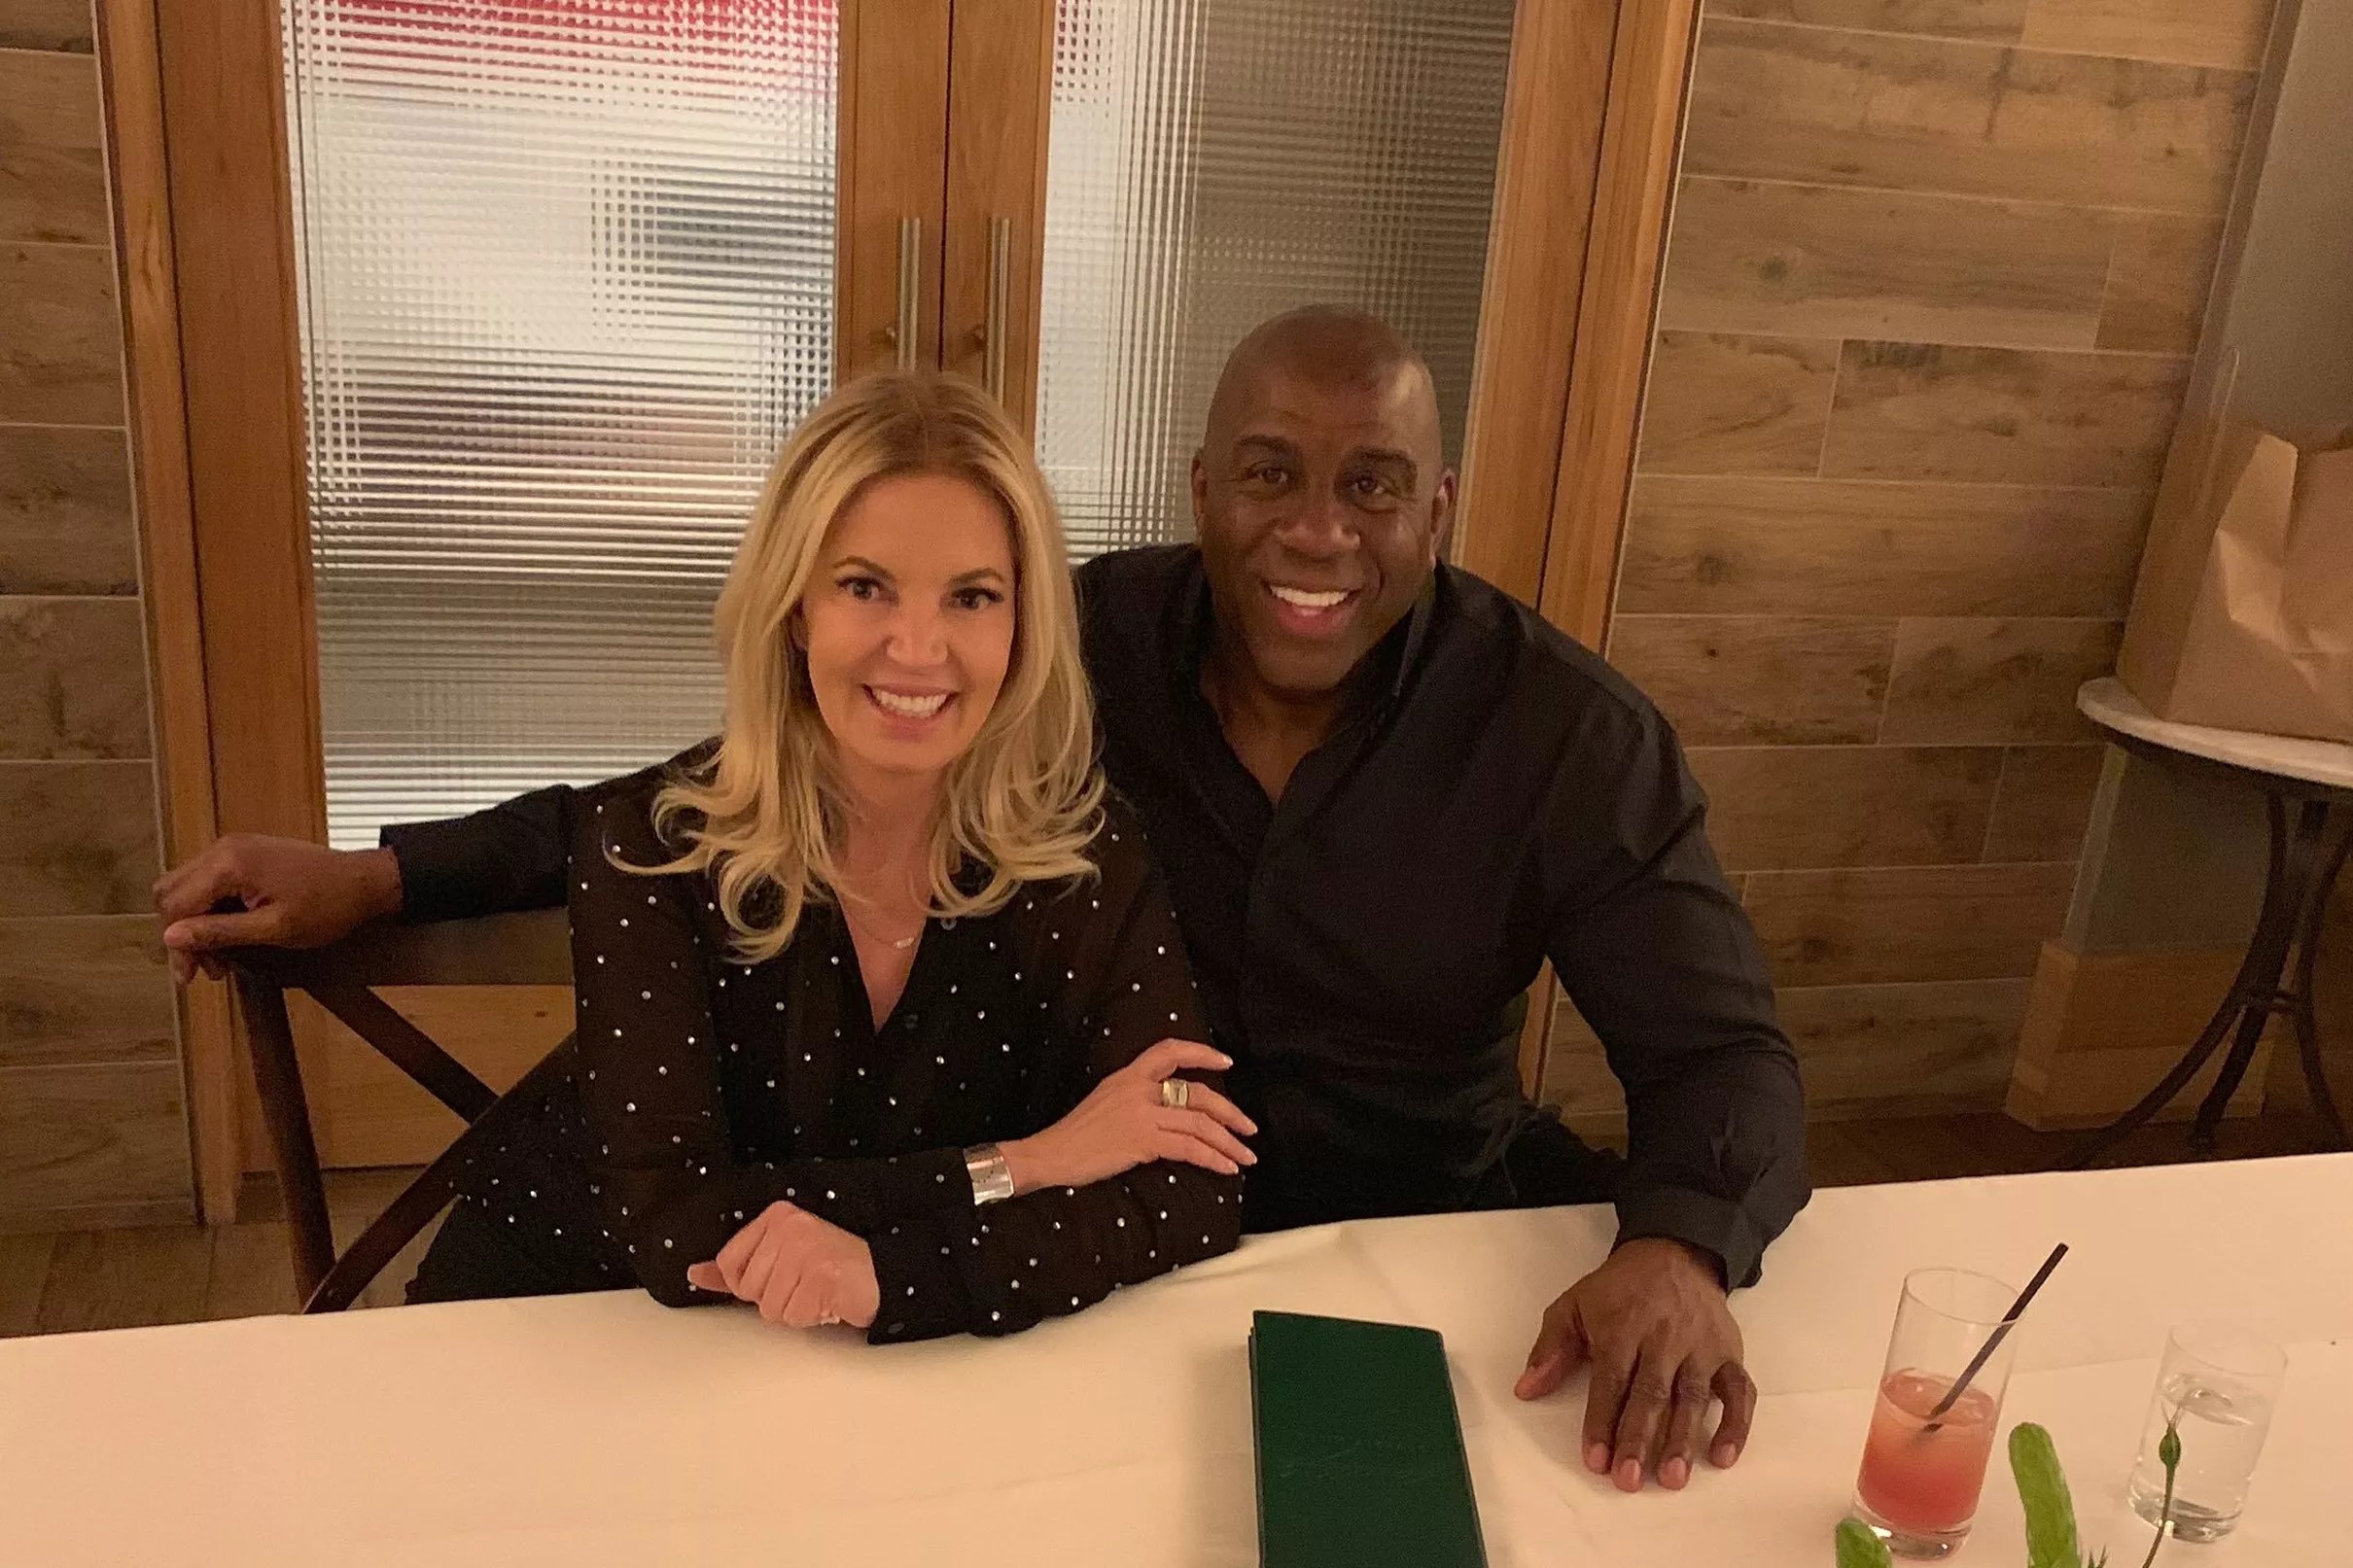 Magic Johnson and Jeanie Buss meet for dinner, are reportedly in 'regu...